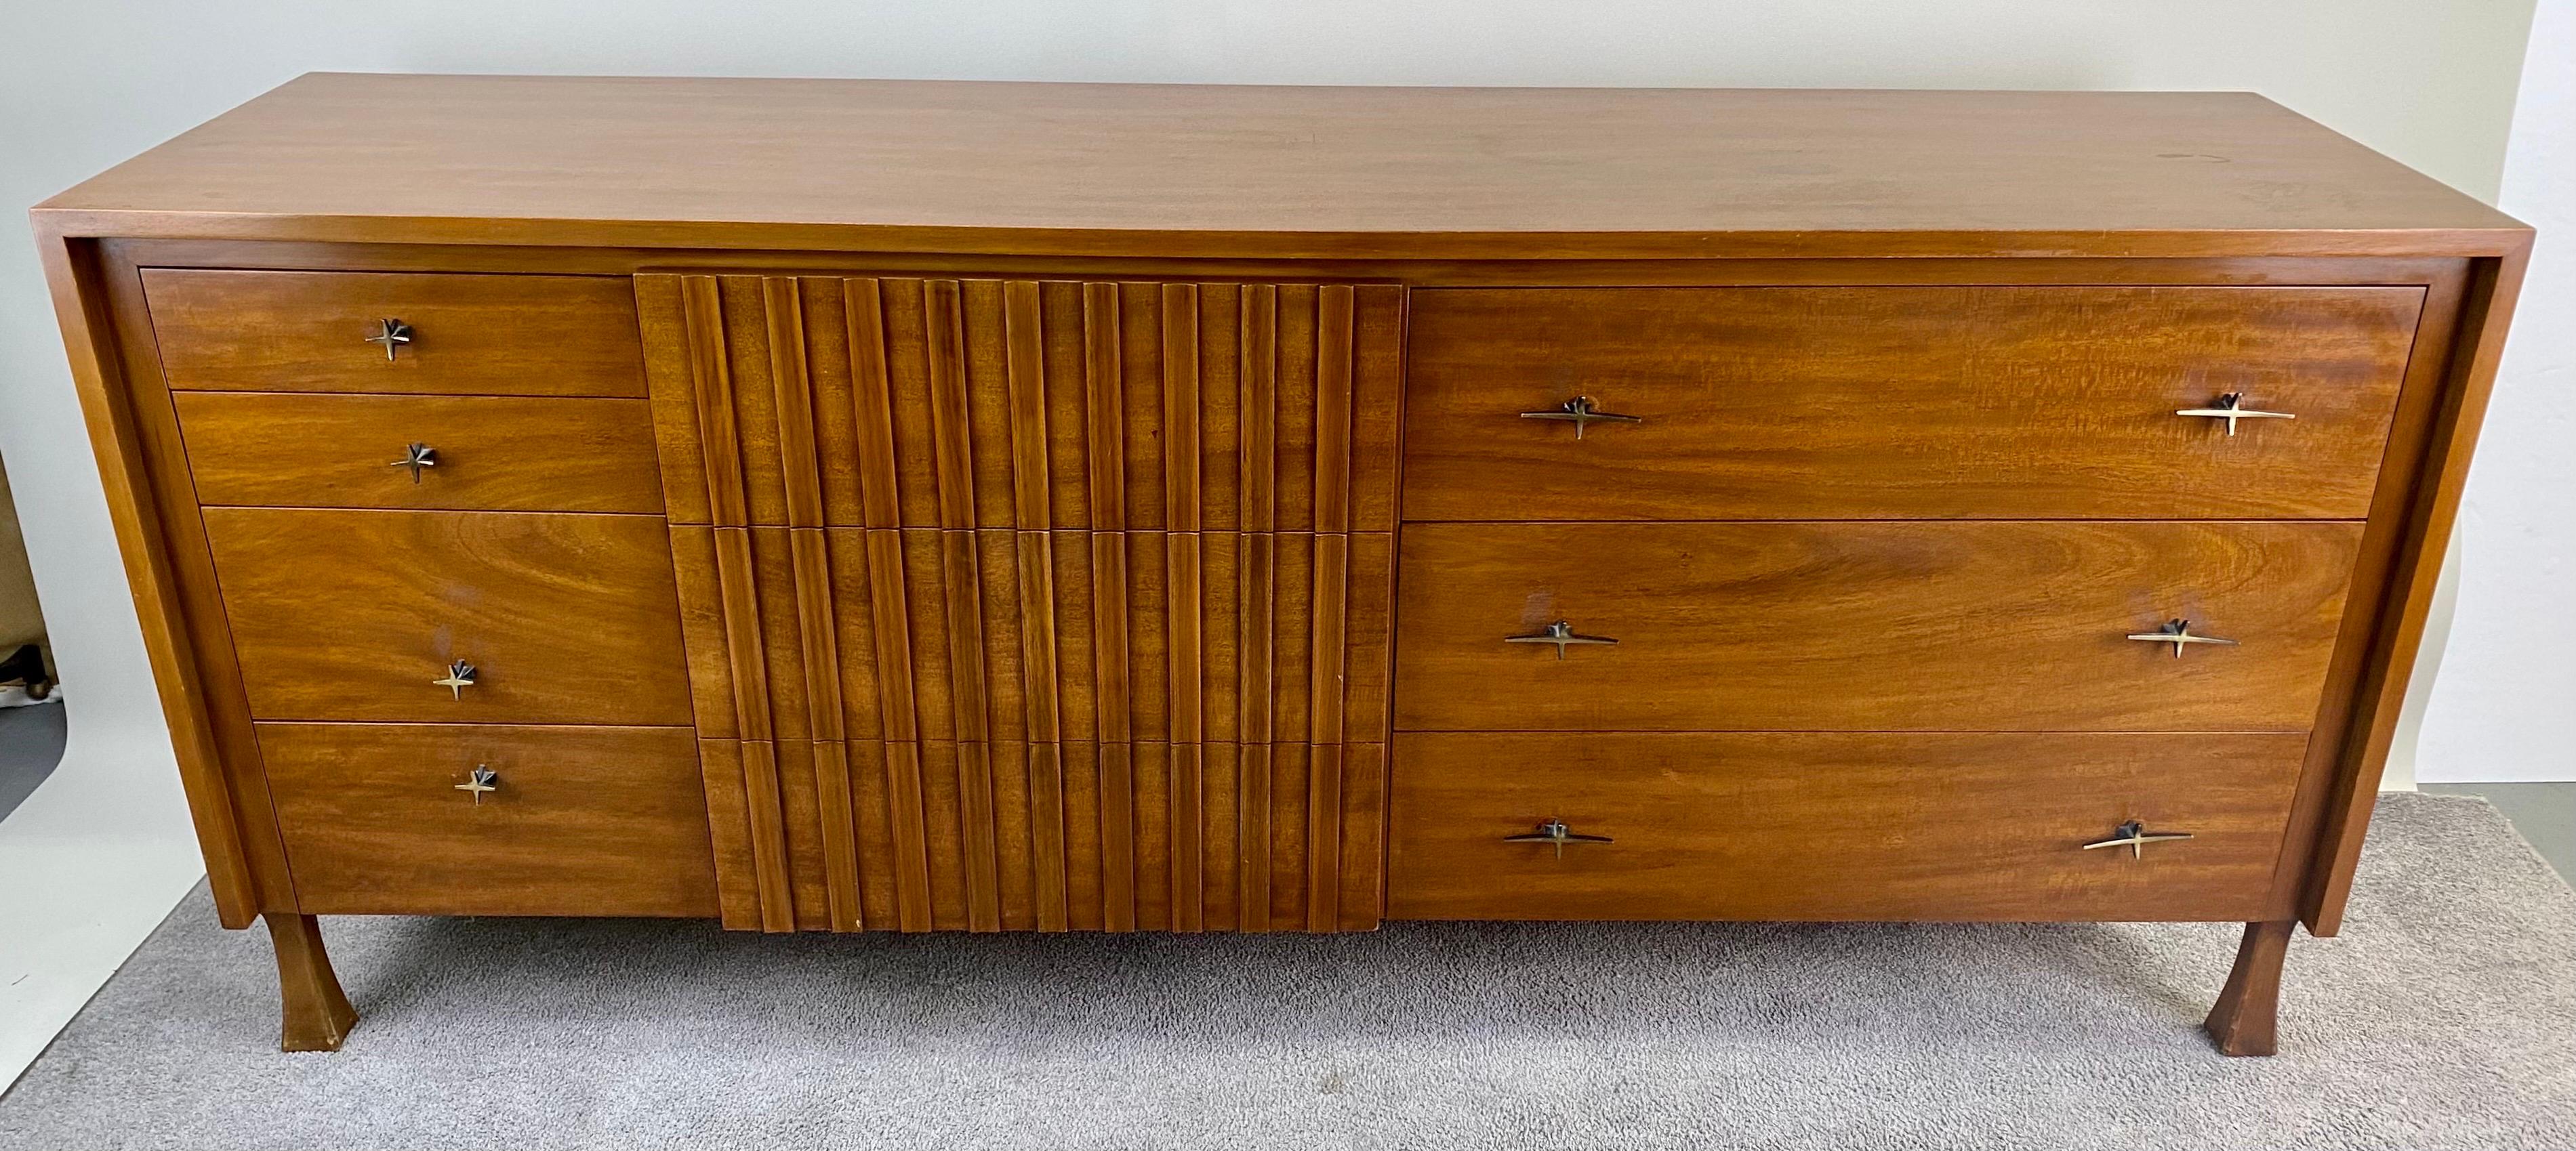 A rare John Widdicomb Mid-Century Modern low boy large dresser or credenza. Crafted with precision from high-quality walnut, this dresser stands as a testament to the enduring allure of Mid Century Modern aesthetics. Boasting a generous offering of